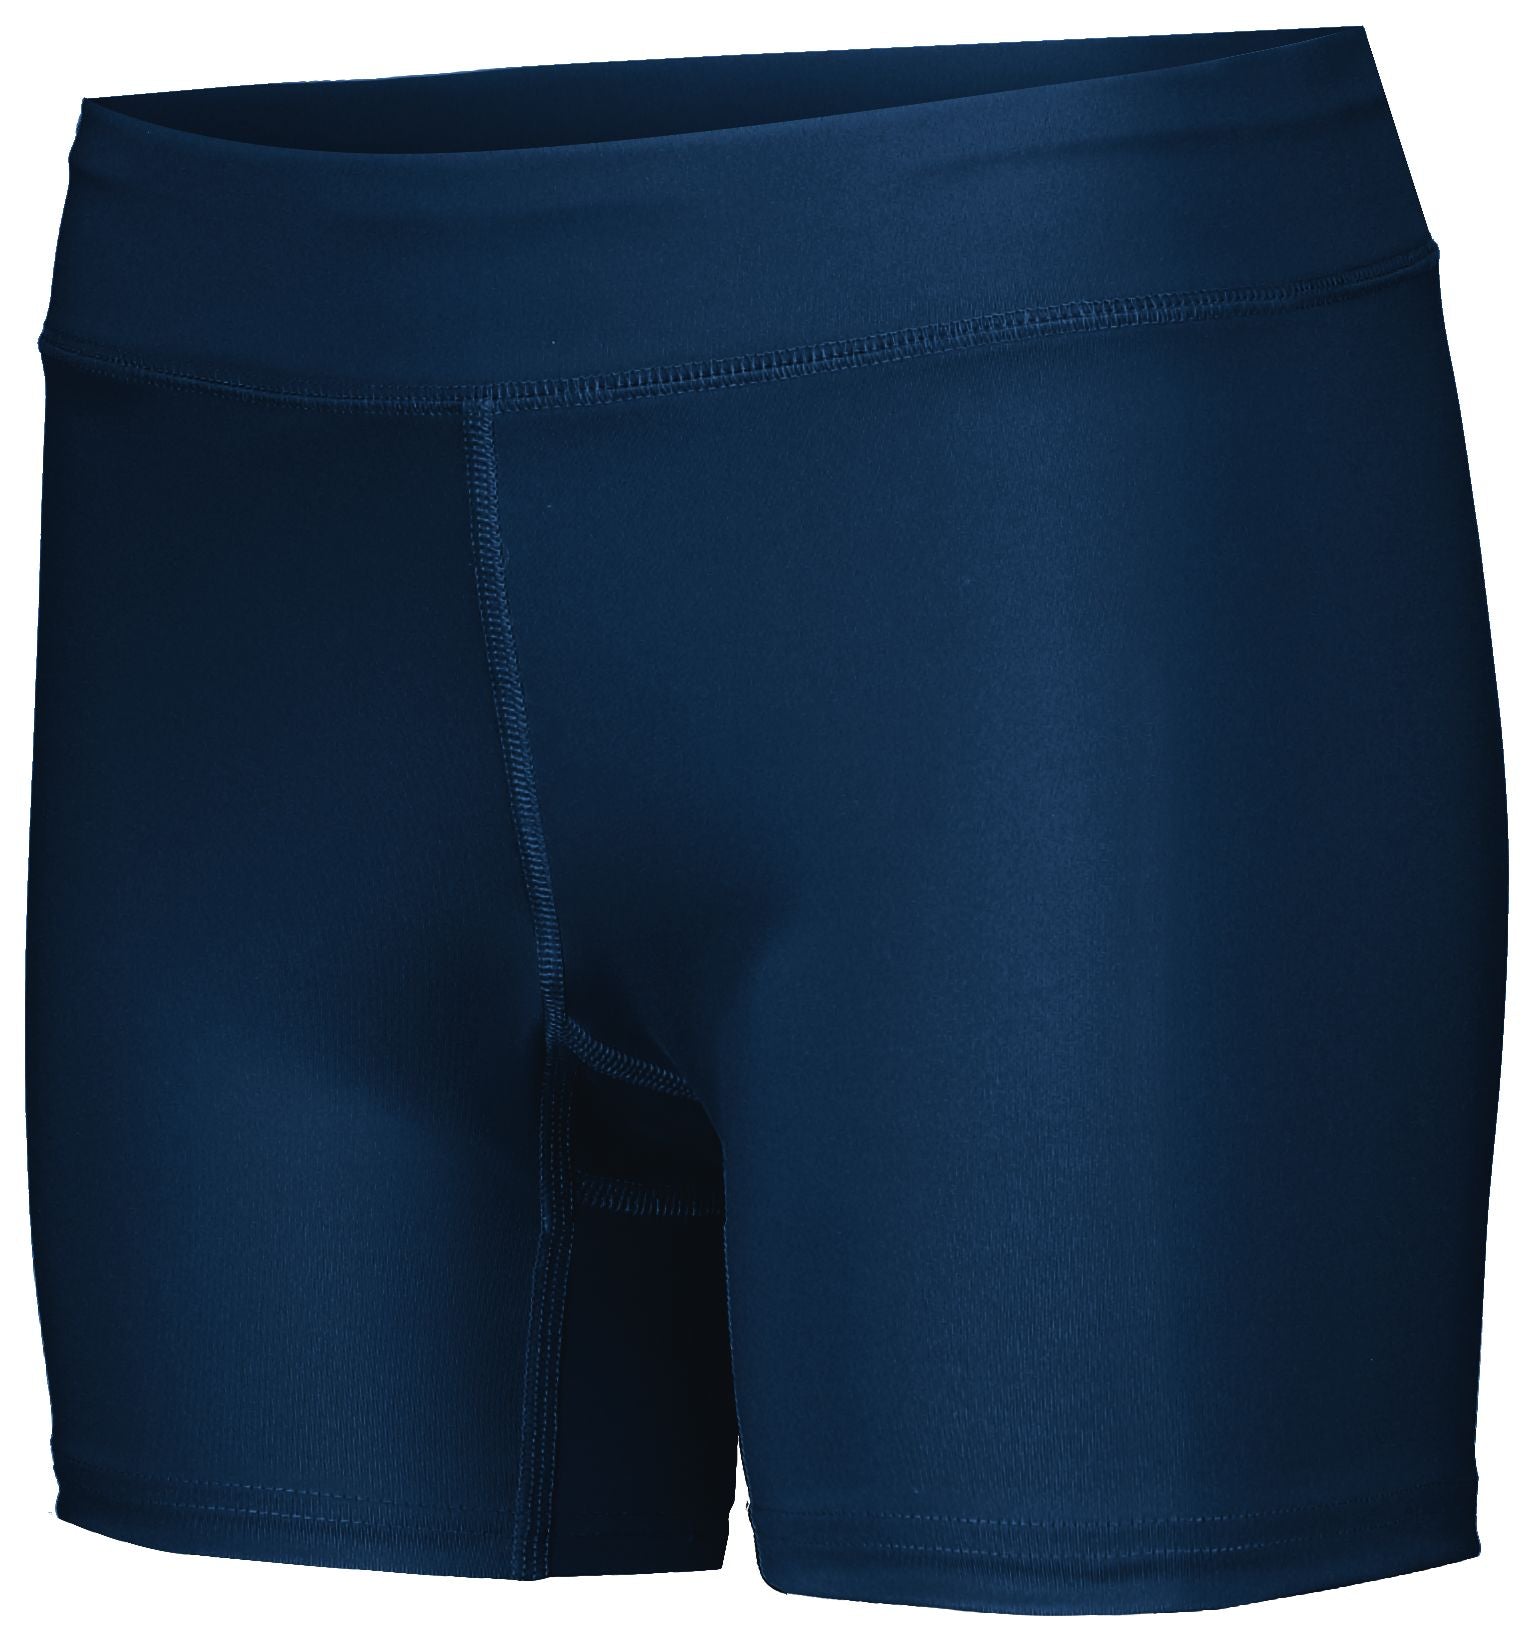 Holloway Ladies Pr Max Compression Shorts in Navy  -Part of the Ladies, Ladies-Shorts, Track-Field, Holloway product lines at KanaleyCreations.com